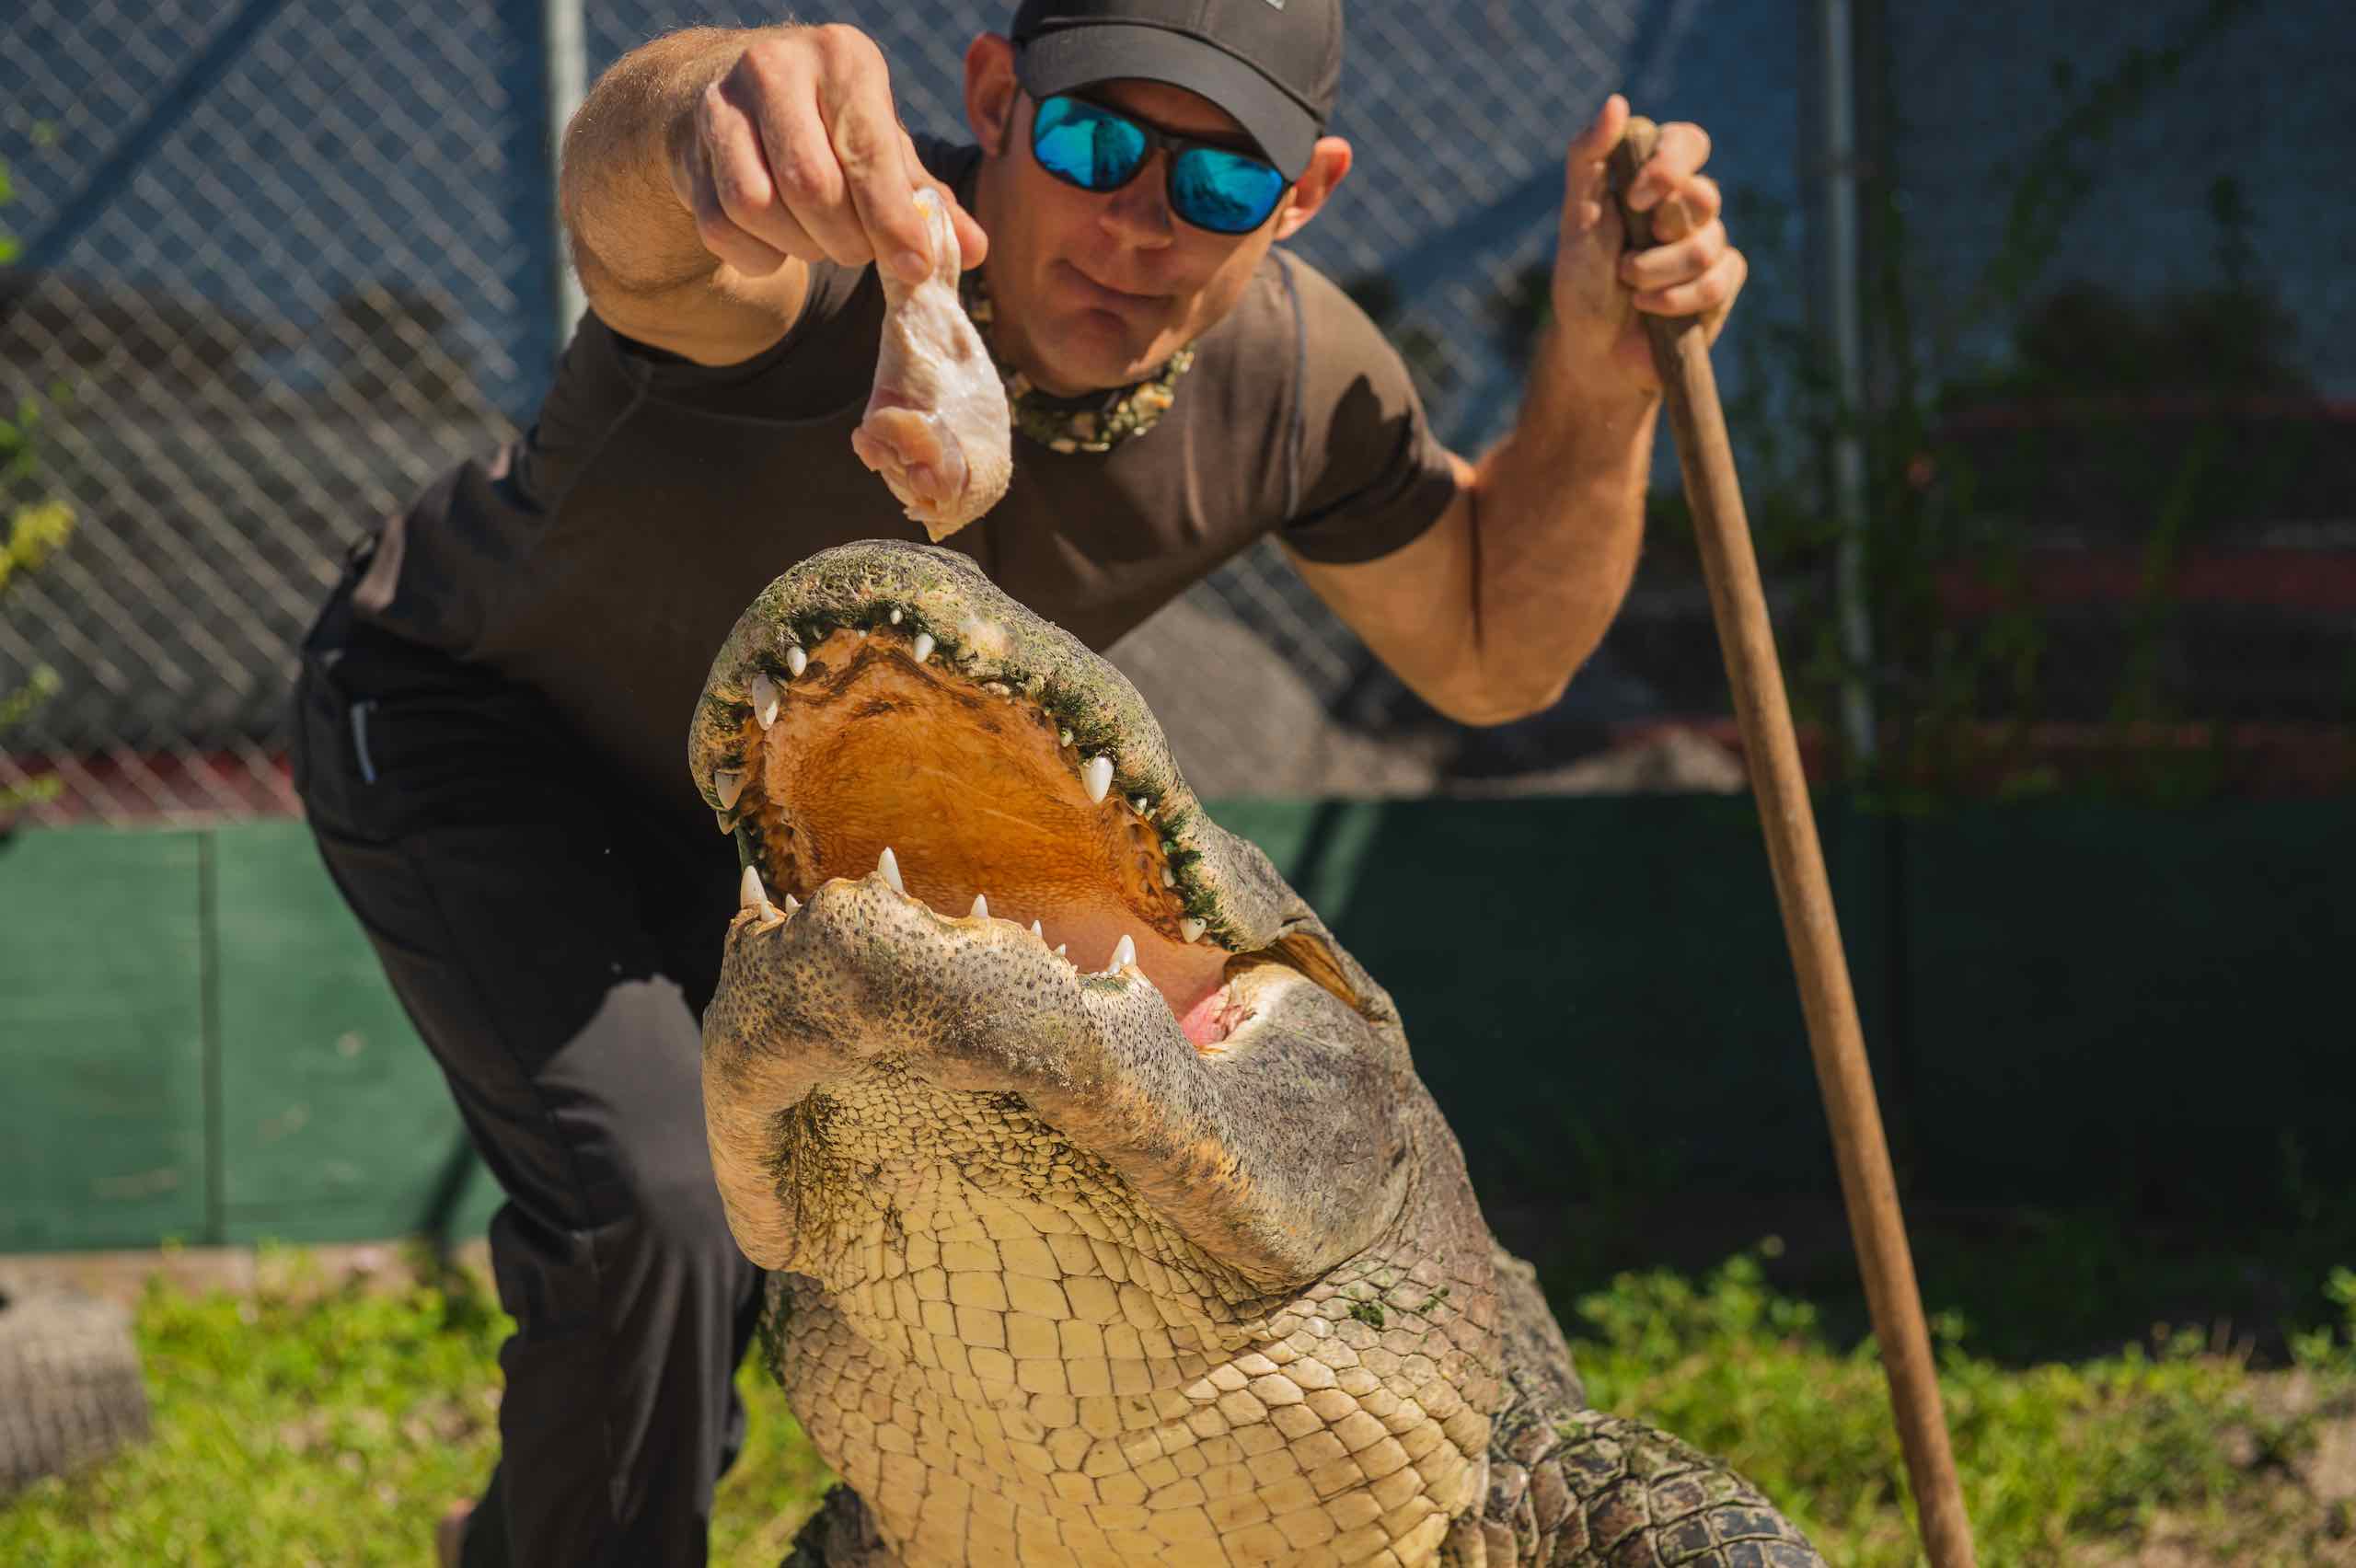 Everglades Holiday Park Man wearing a black cap holding a stick feeding a raw chicken drumstick to an alligator from behind